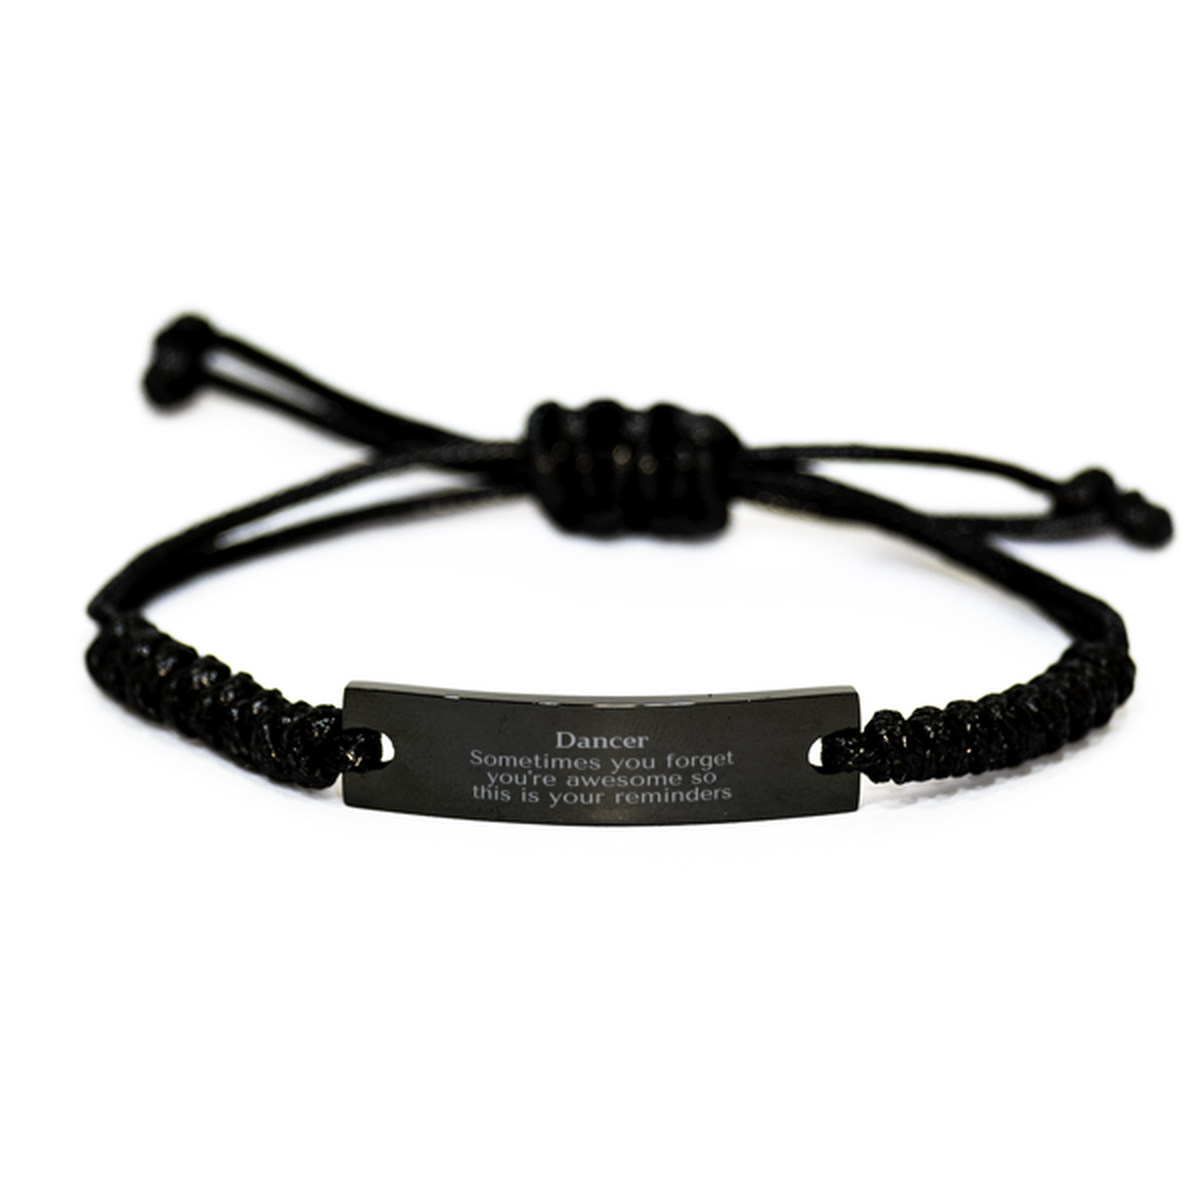 Sentimental Dancer Black Rope Bracelet, Dancer Sometimes you forget you're awesome so this is your reminders, Graduation Christmas Birthday Gifts for Dancer, Men, Women, Coworkers